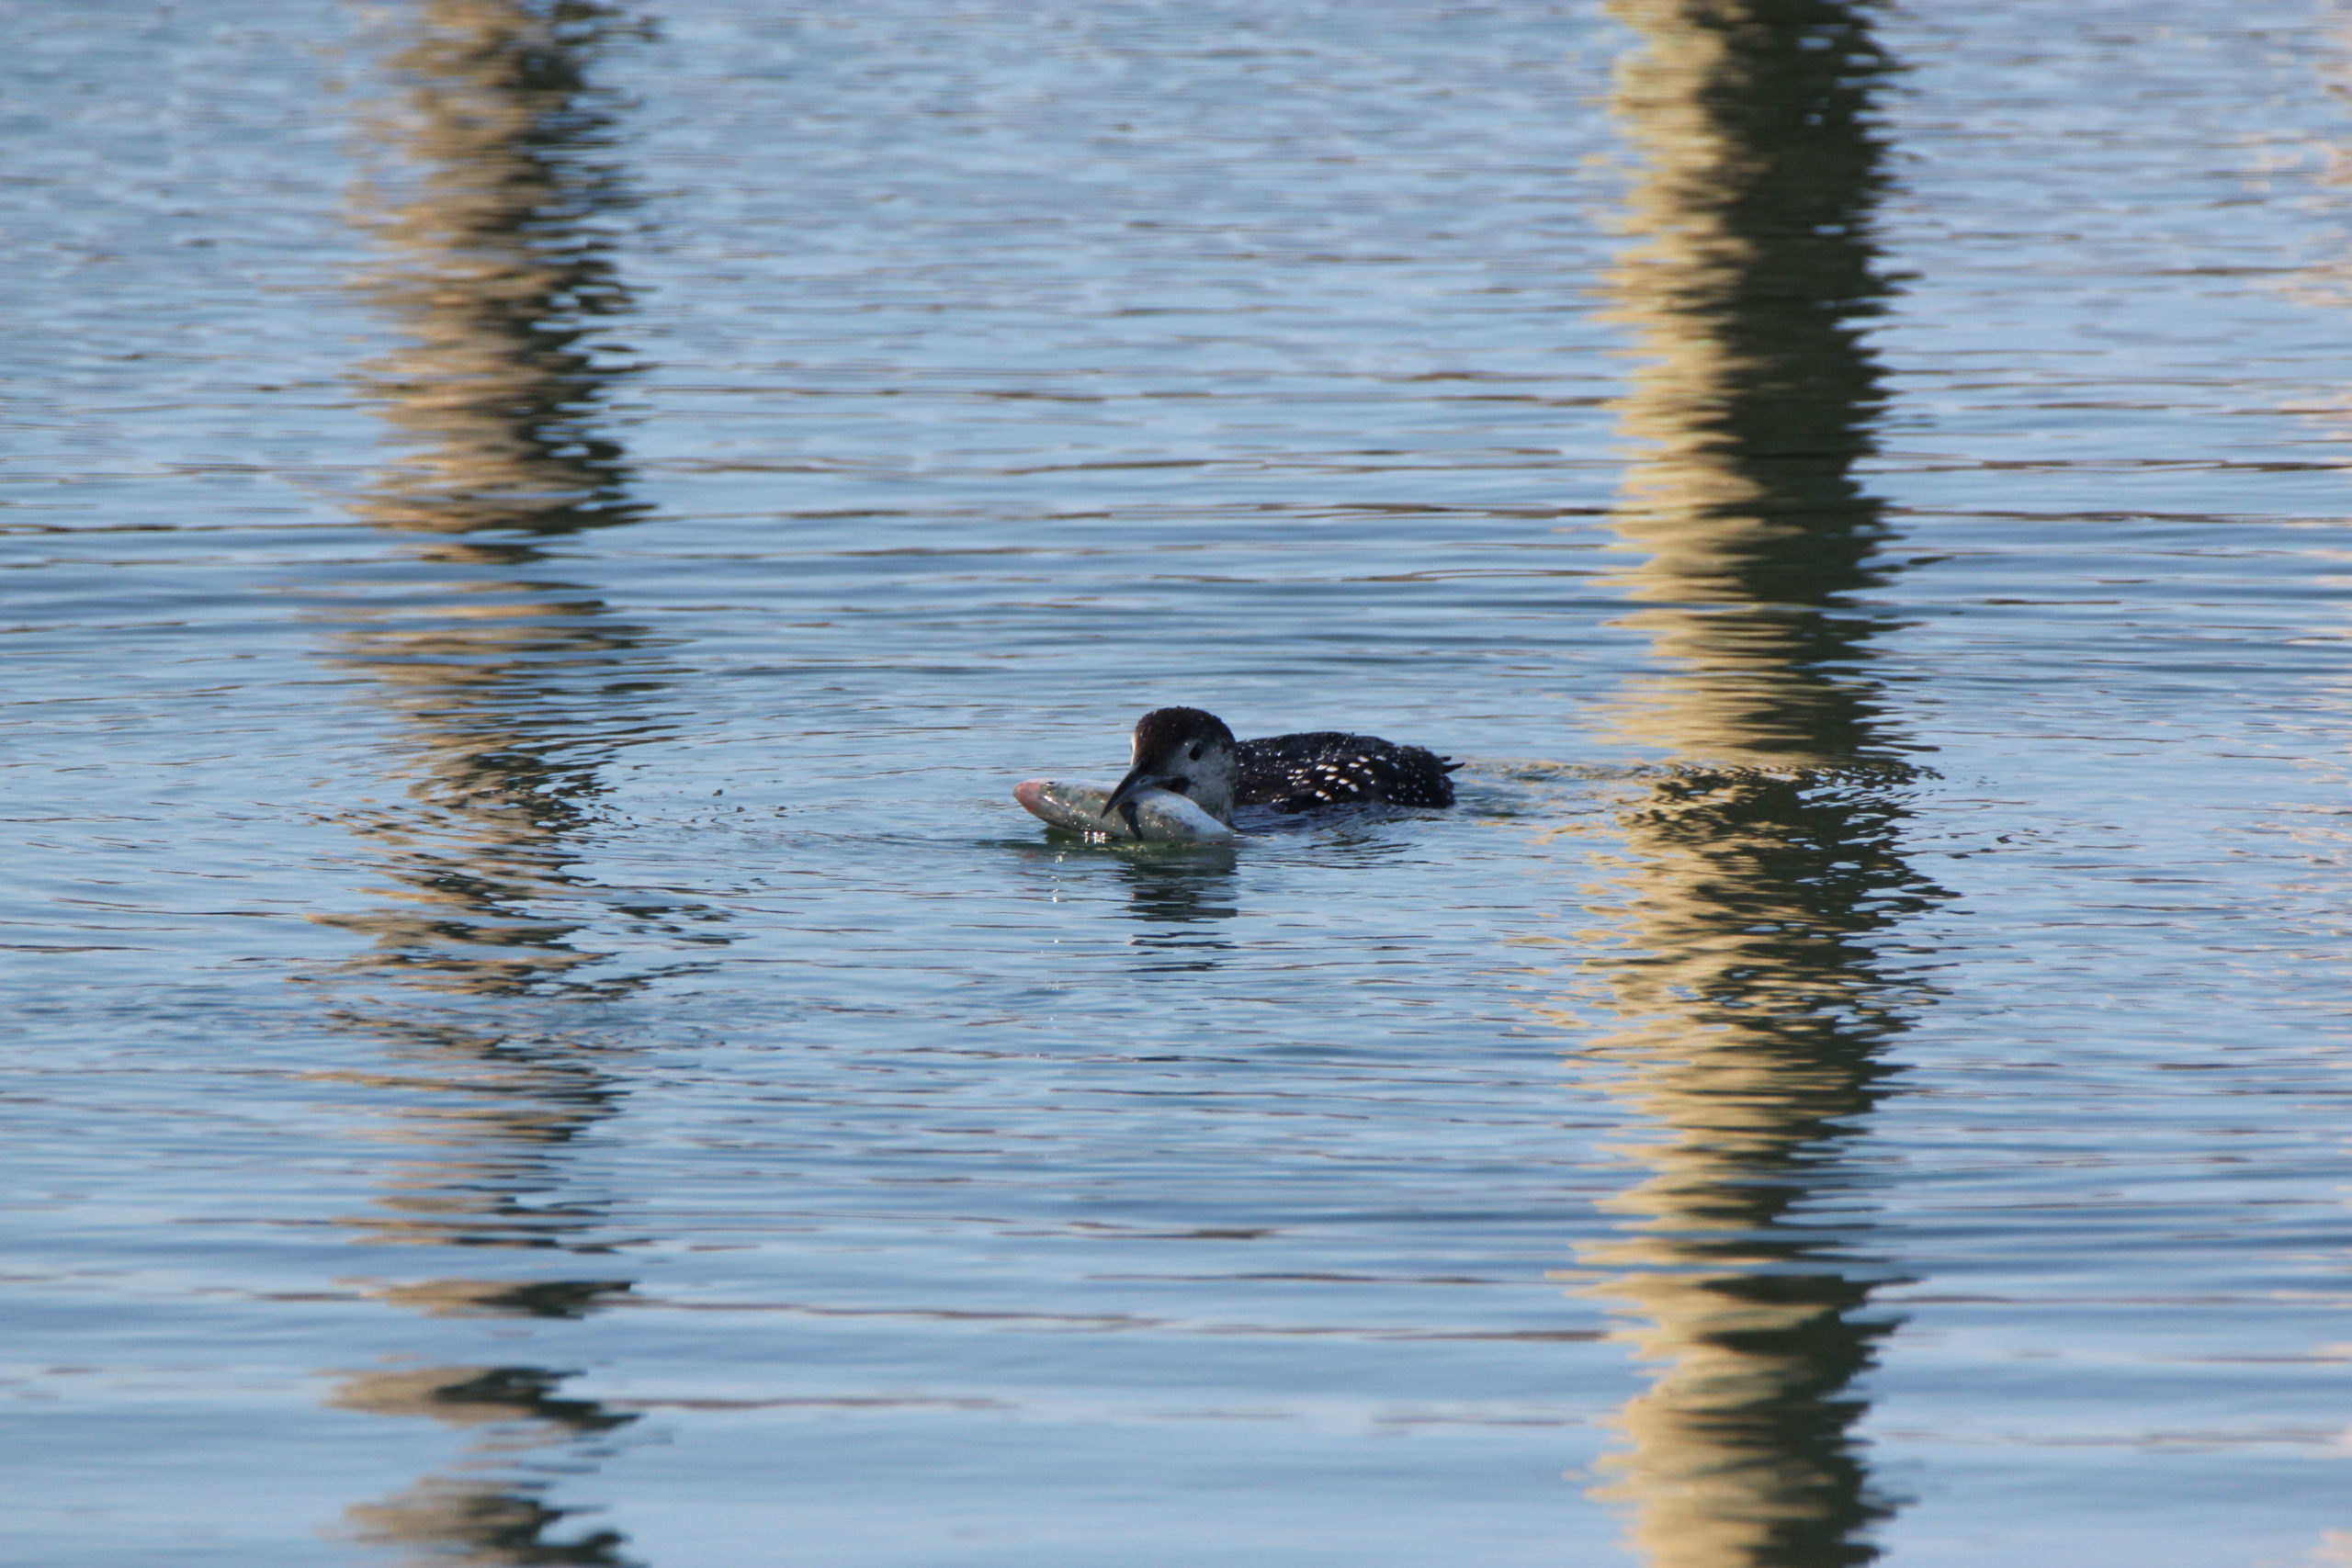 Common loon with bunker. TERRY SULLIVAN